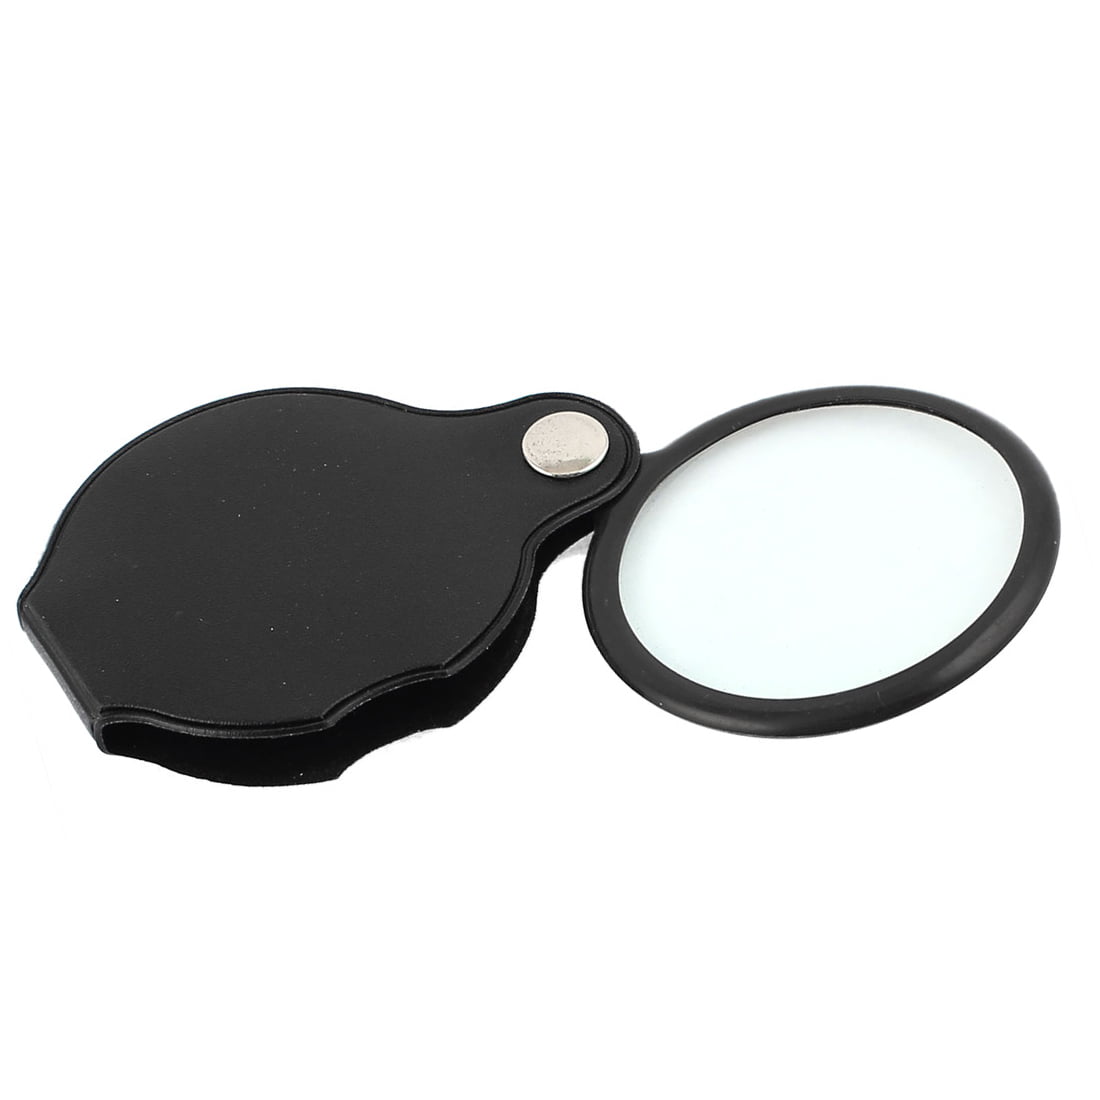 New Pocket Folding Spiegel Magnifier Magnifying Glass 10X Loupe Round Cover 50mm 